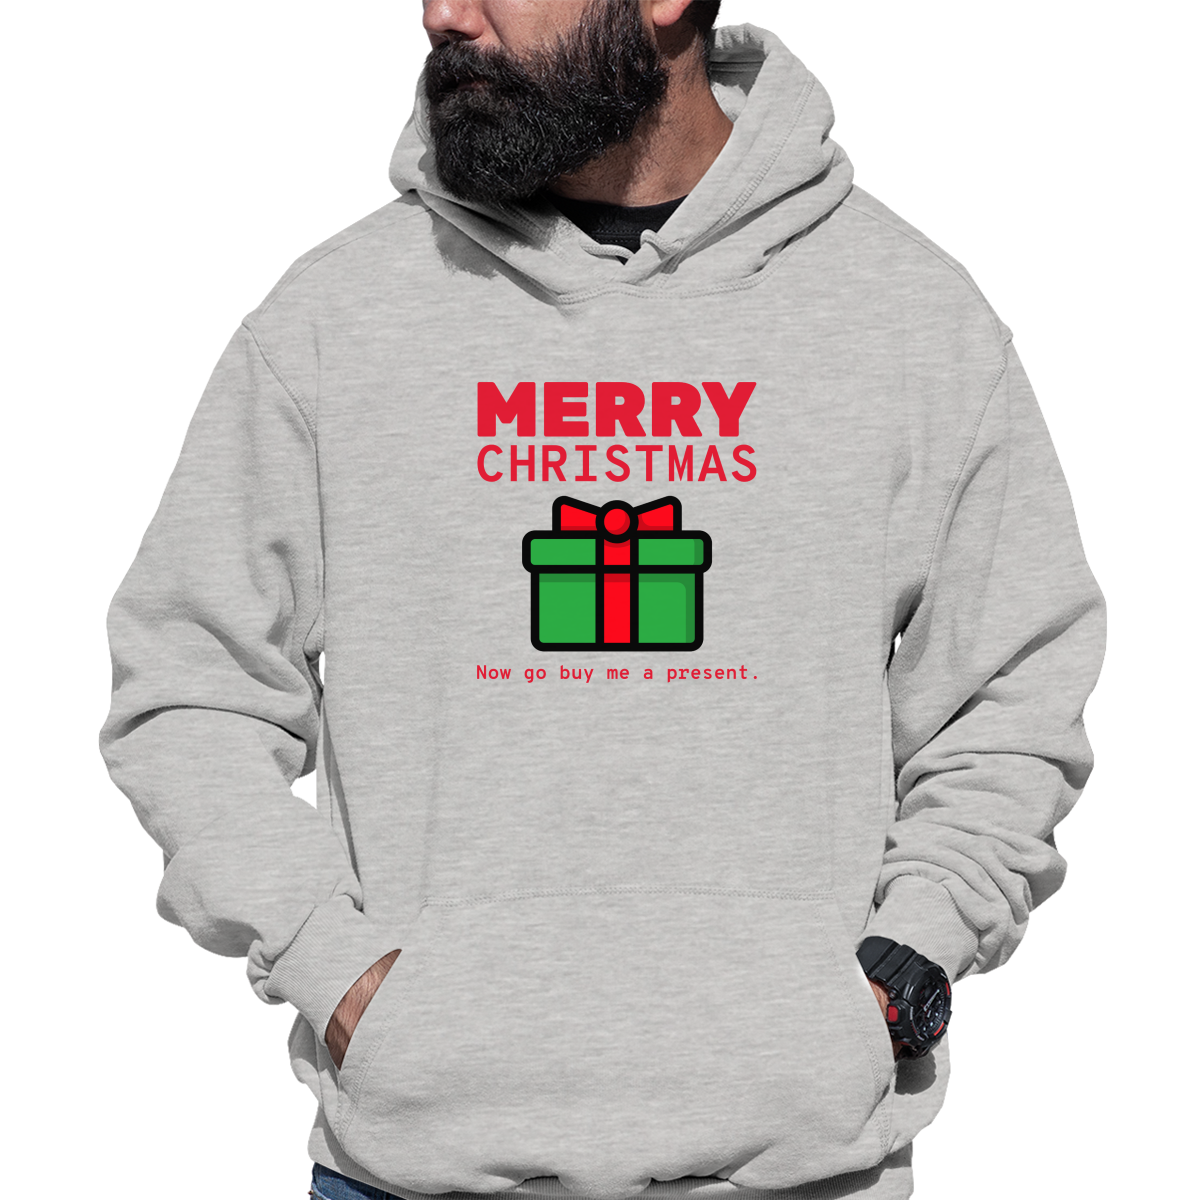 Merry Christmas Now Go Buy Me a Present Unisex Hoodie | Gray